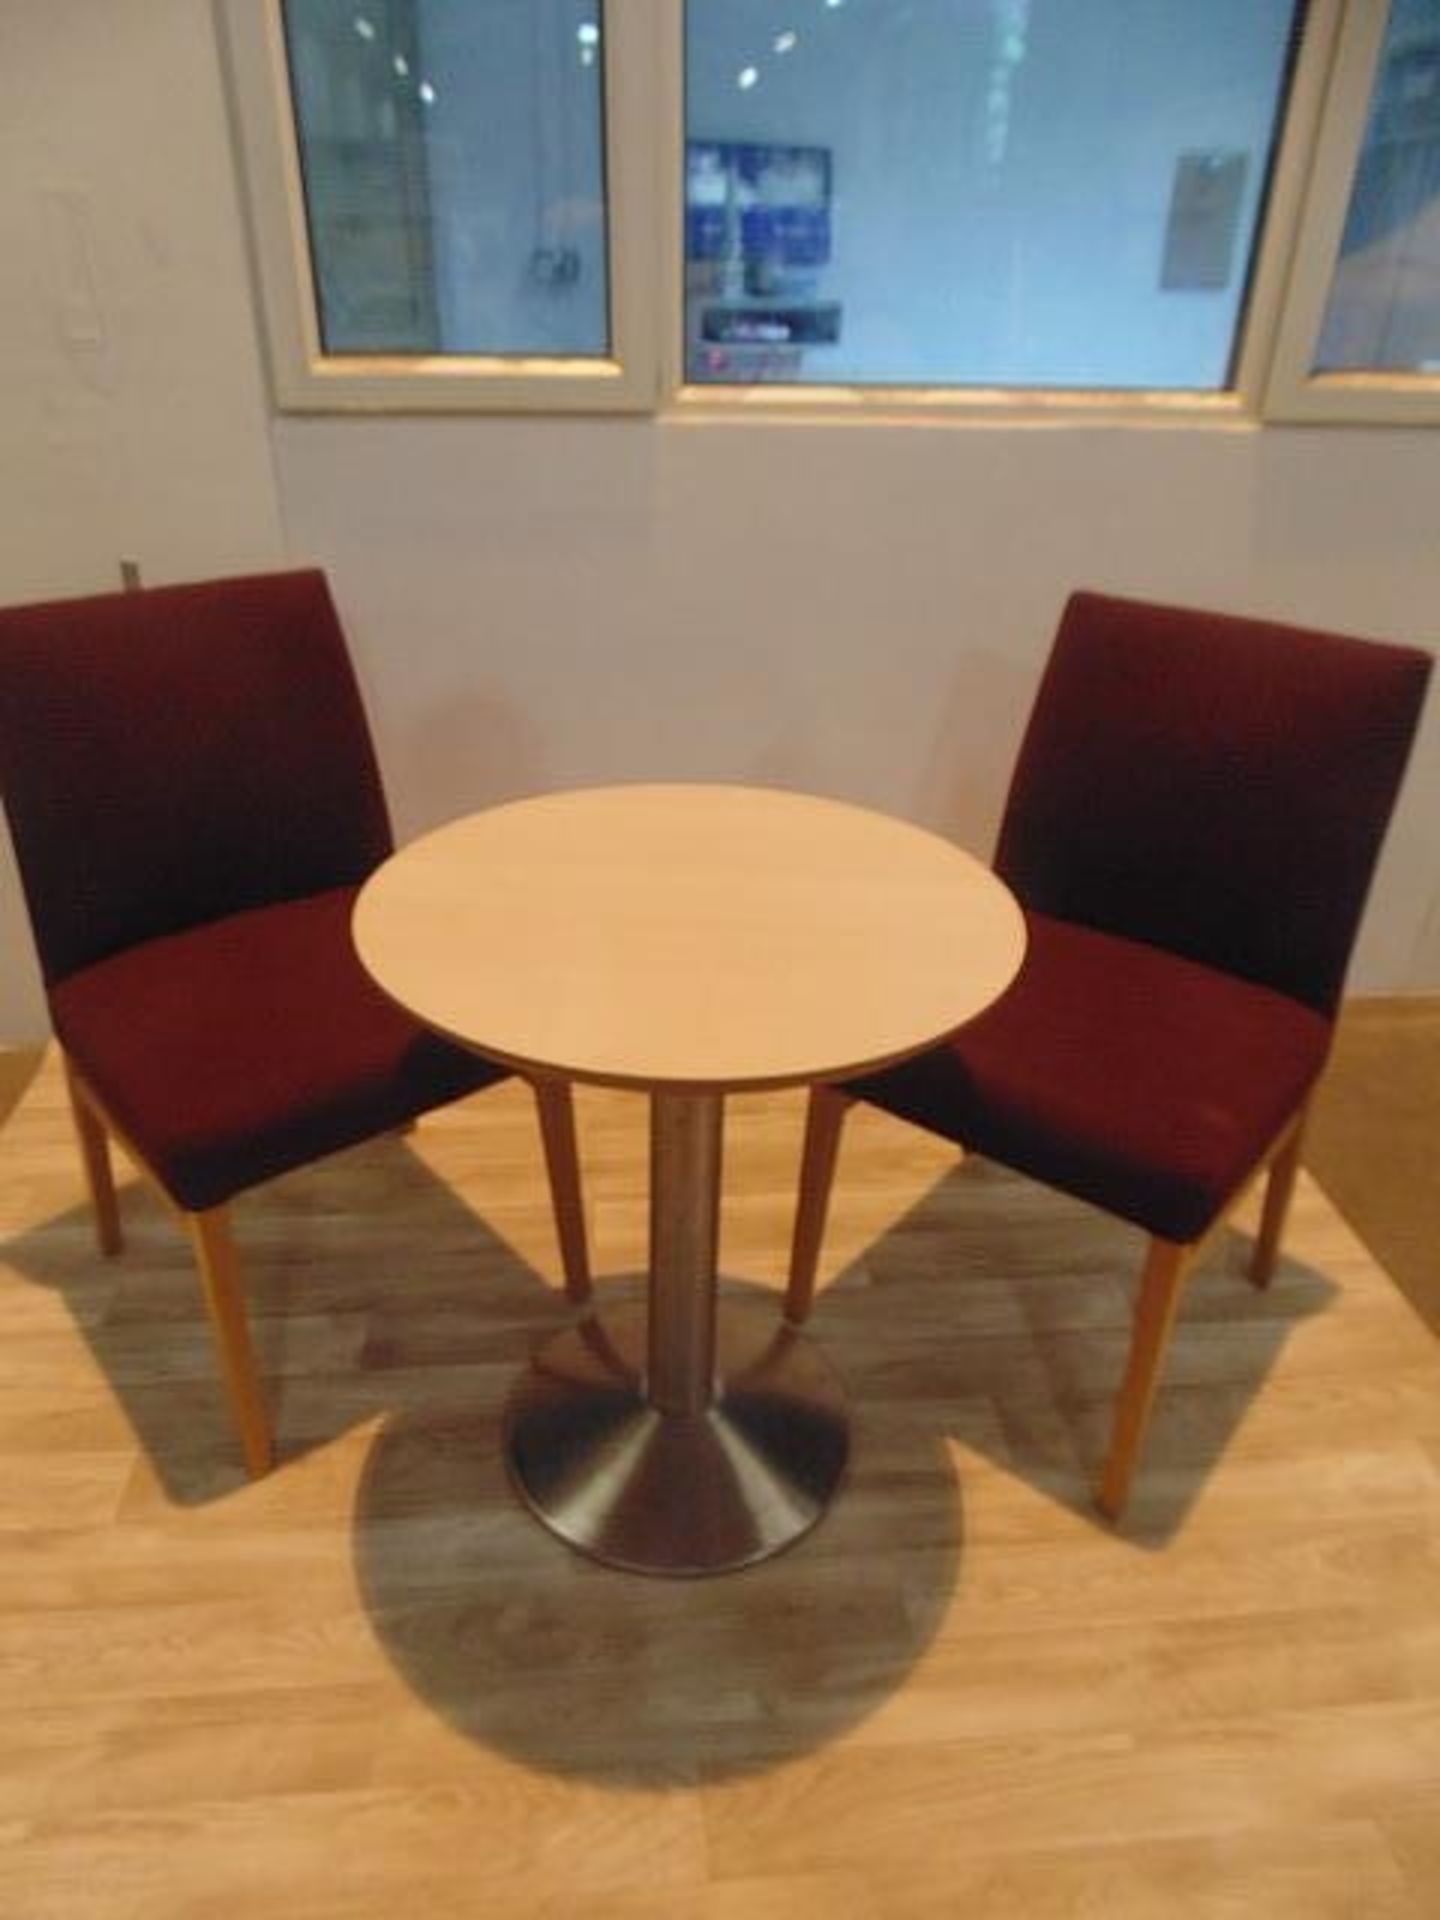 Beach round top table with stainless steel pedestal complete with two upholstered side chairs